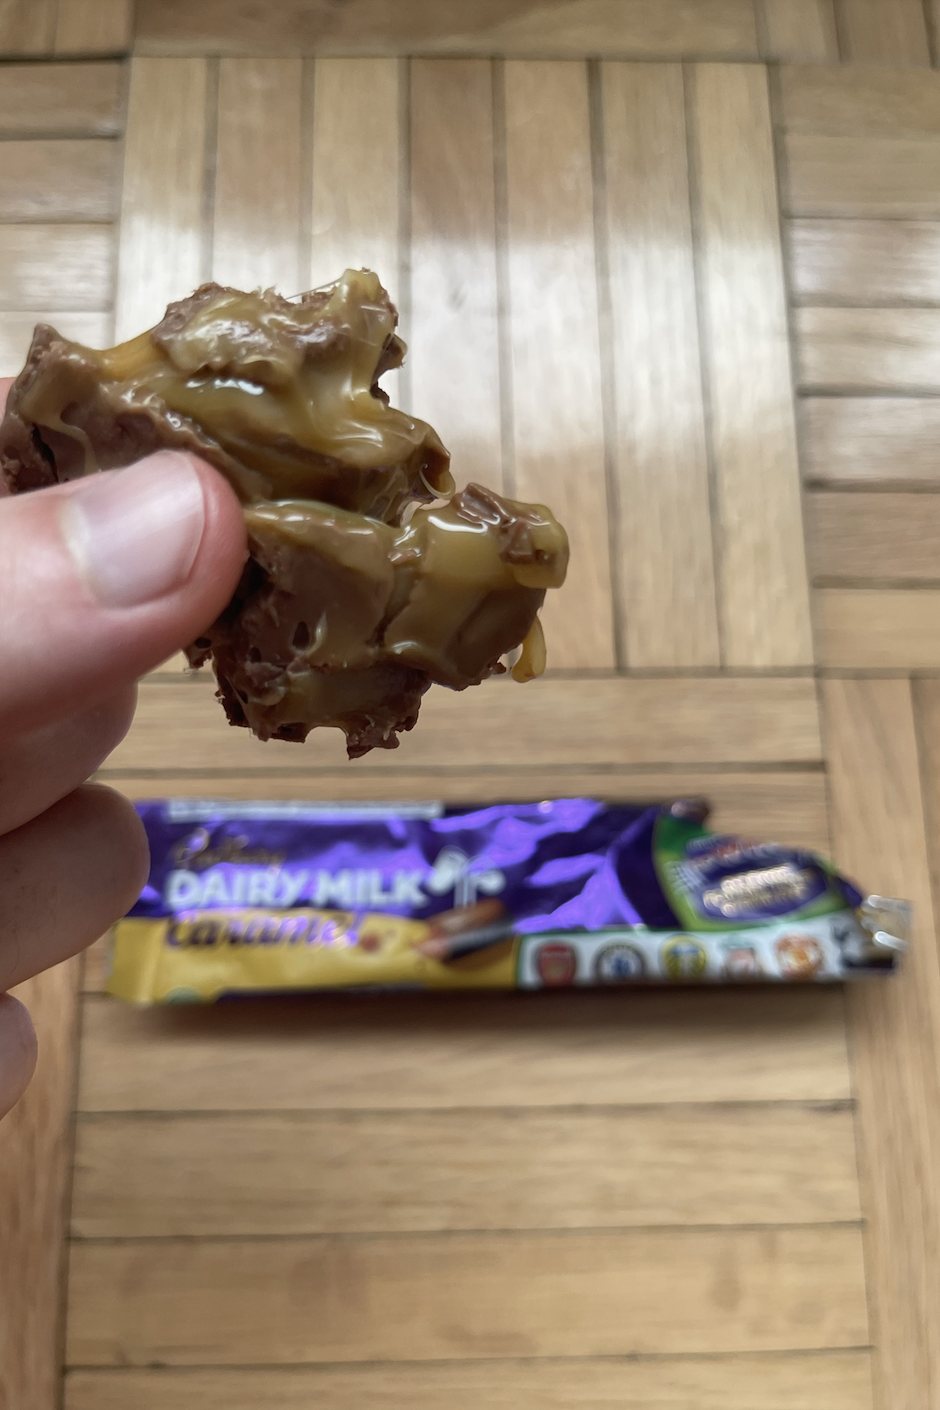 A hand holding a half-eaten chocolate bar with nuts, with an unopened bar of the same kind in the background